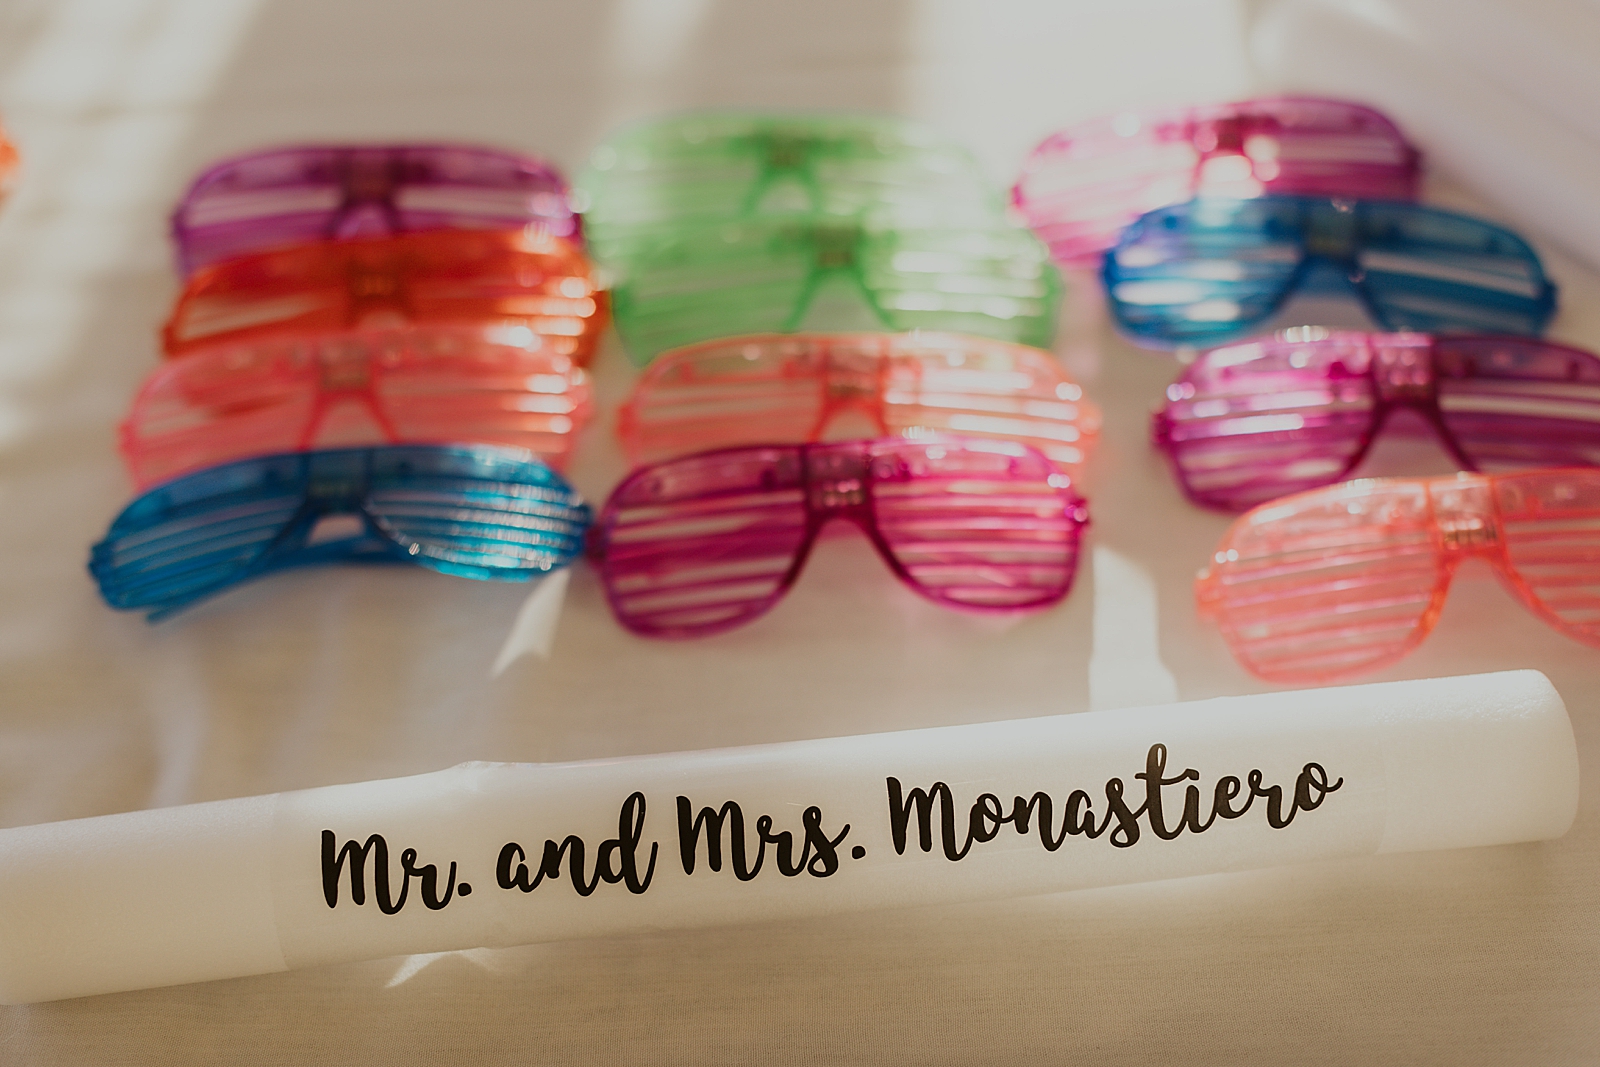 Fun party glasses with Mr and Mrs light sticks